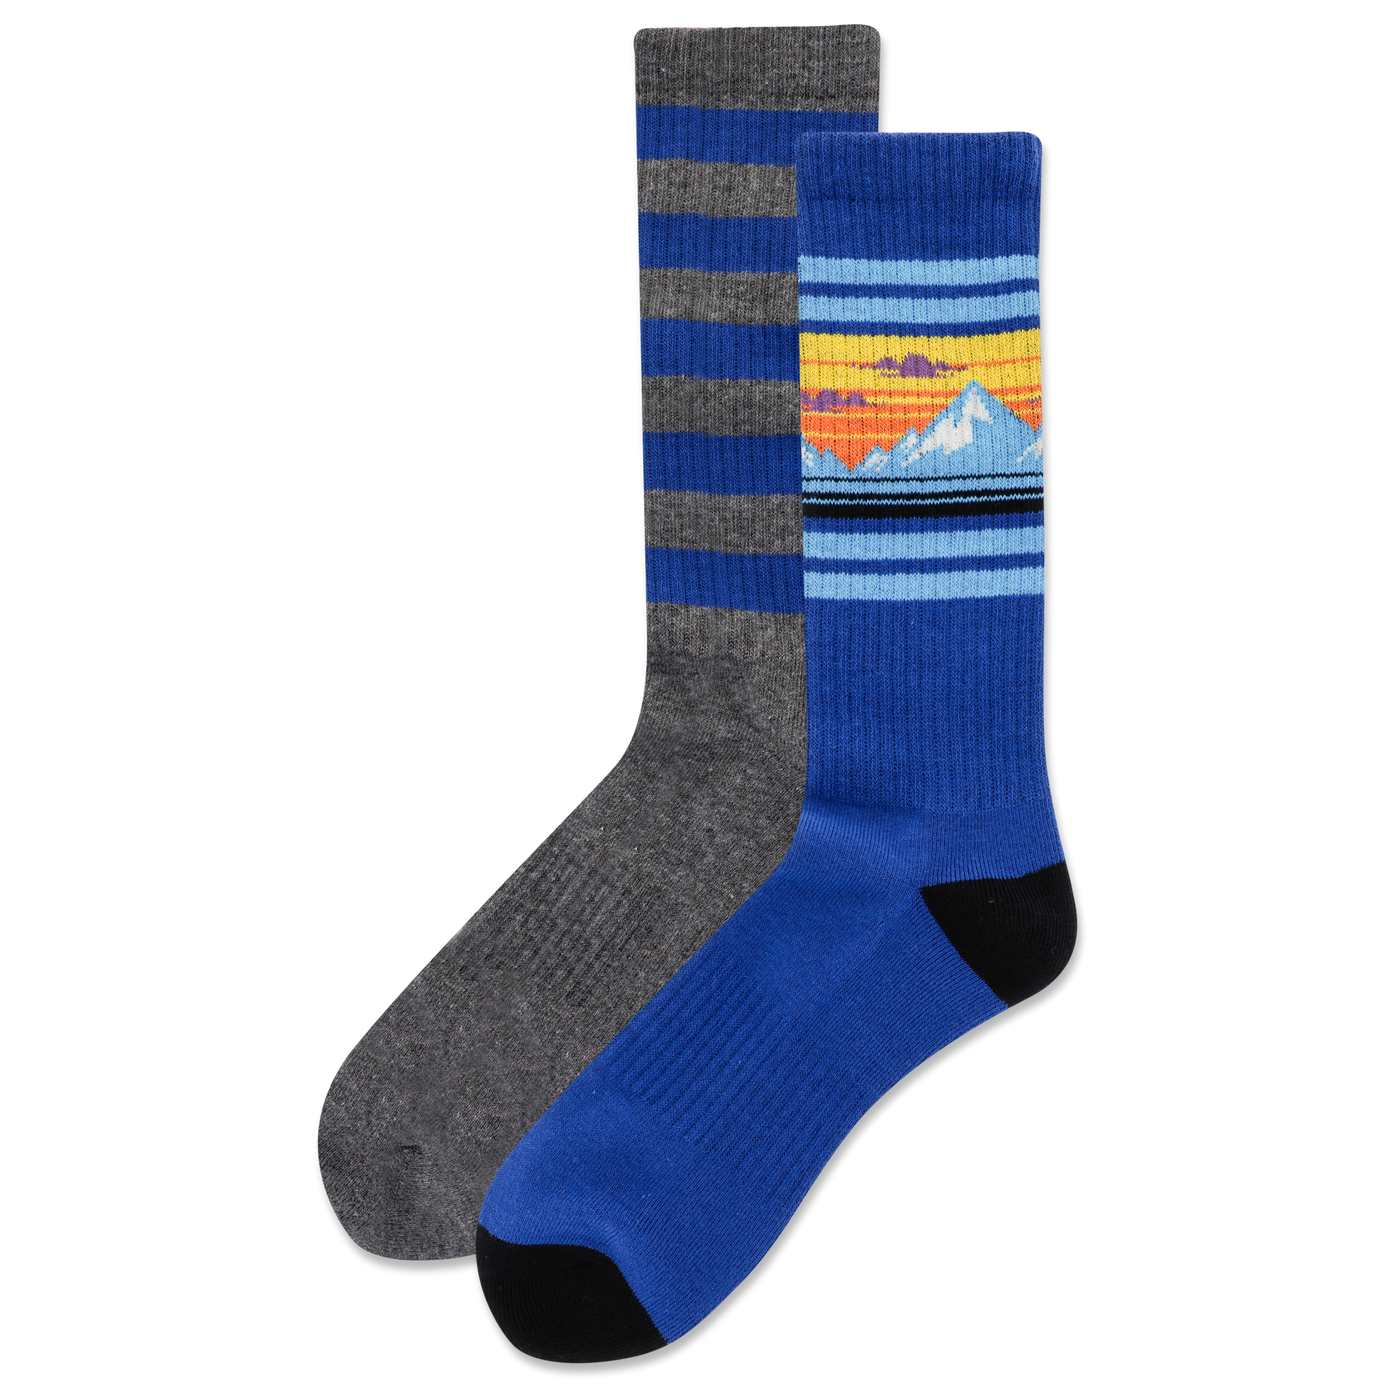 "Mountain Stripe" Polyester Crew Socks by Hot Sox (2 pack) - Large - SALE